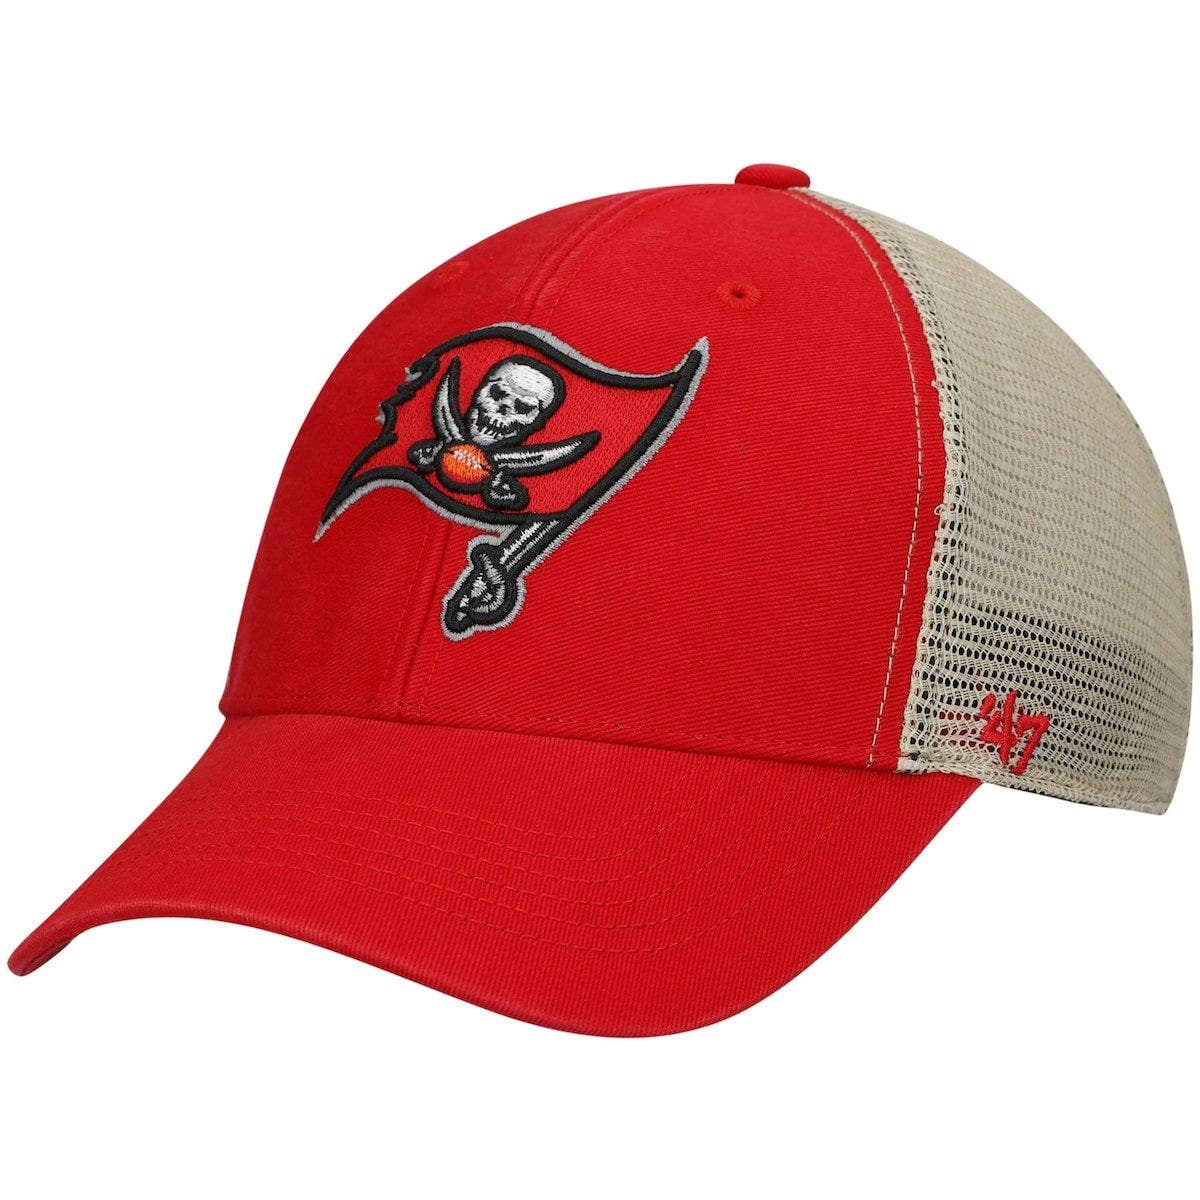 Tampa Bay Buccaneers 8-20 Youth Mesh Back Hat/Cap Red 